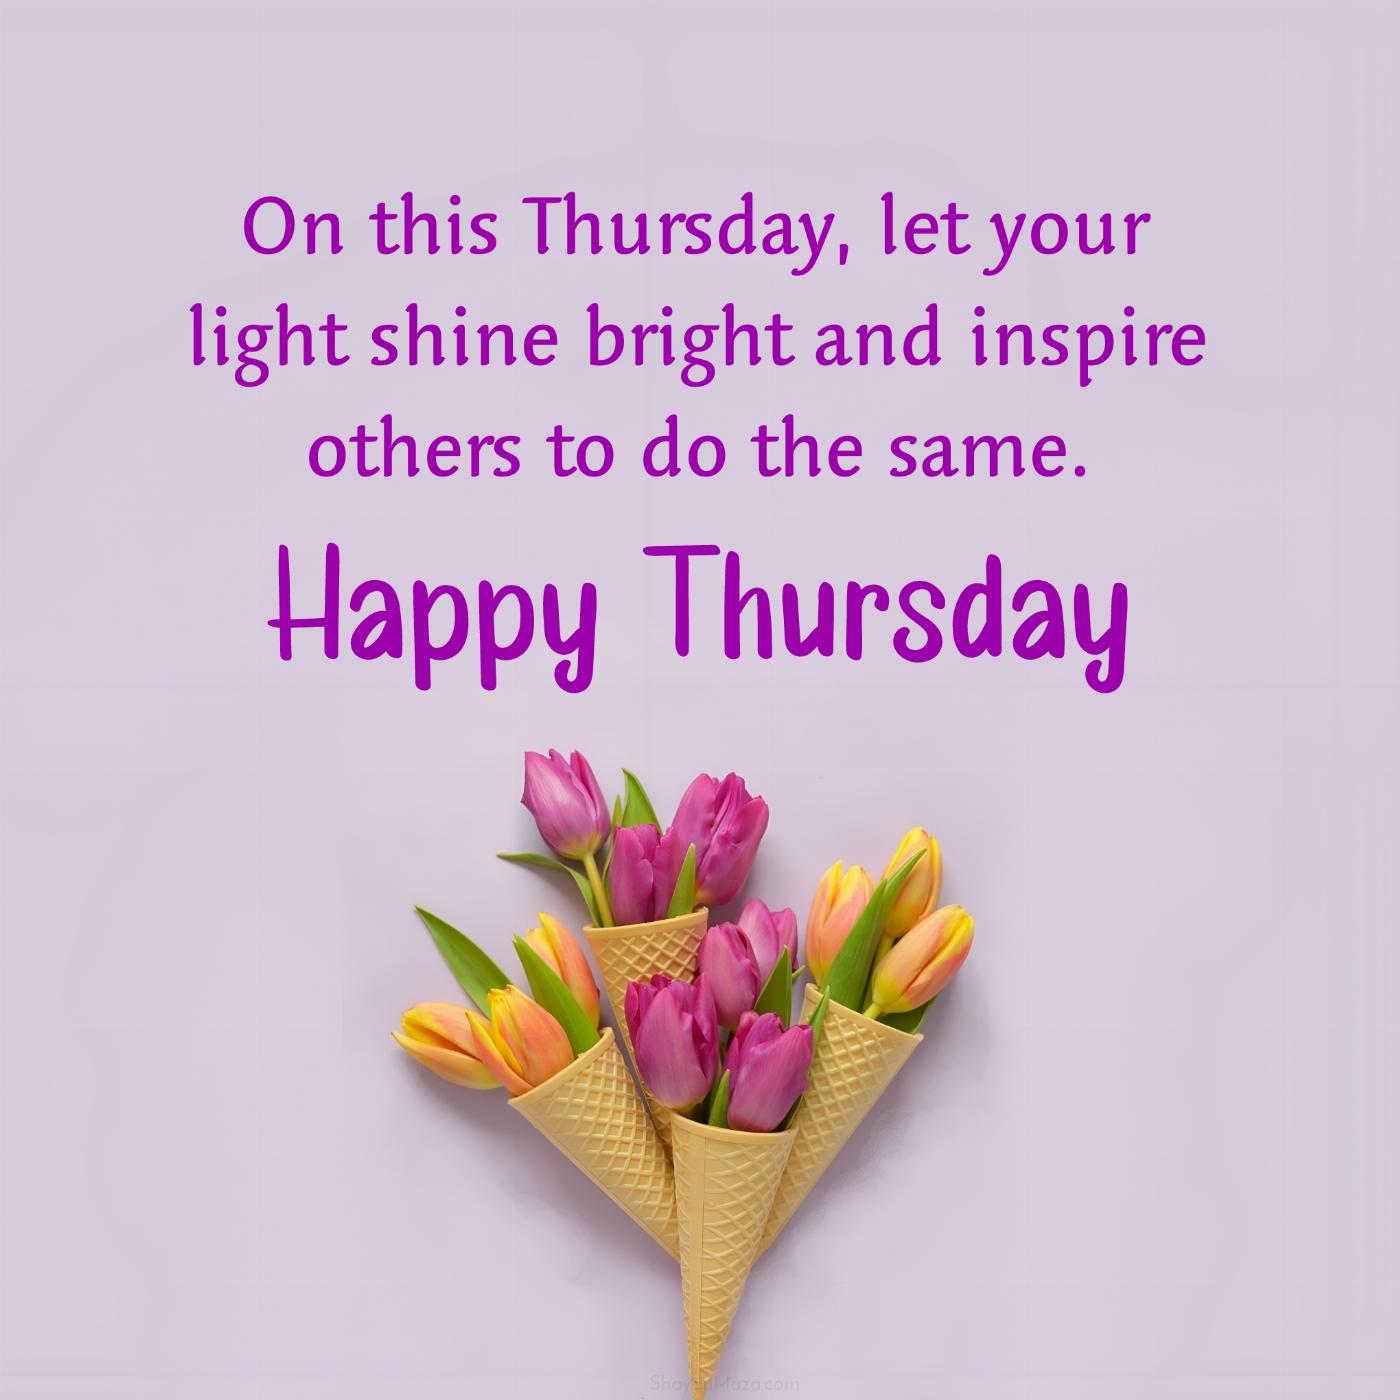 On this Thursday let your light shine bright